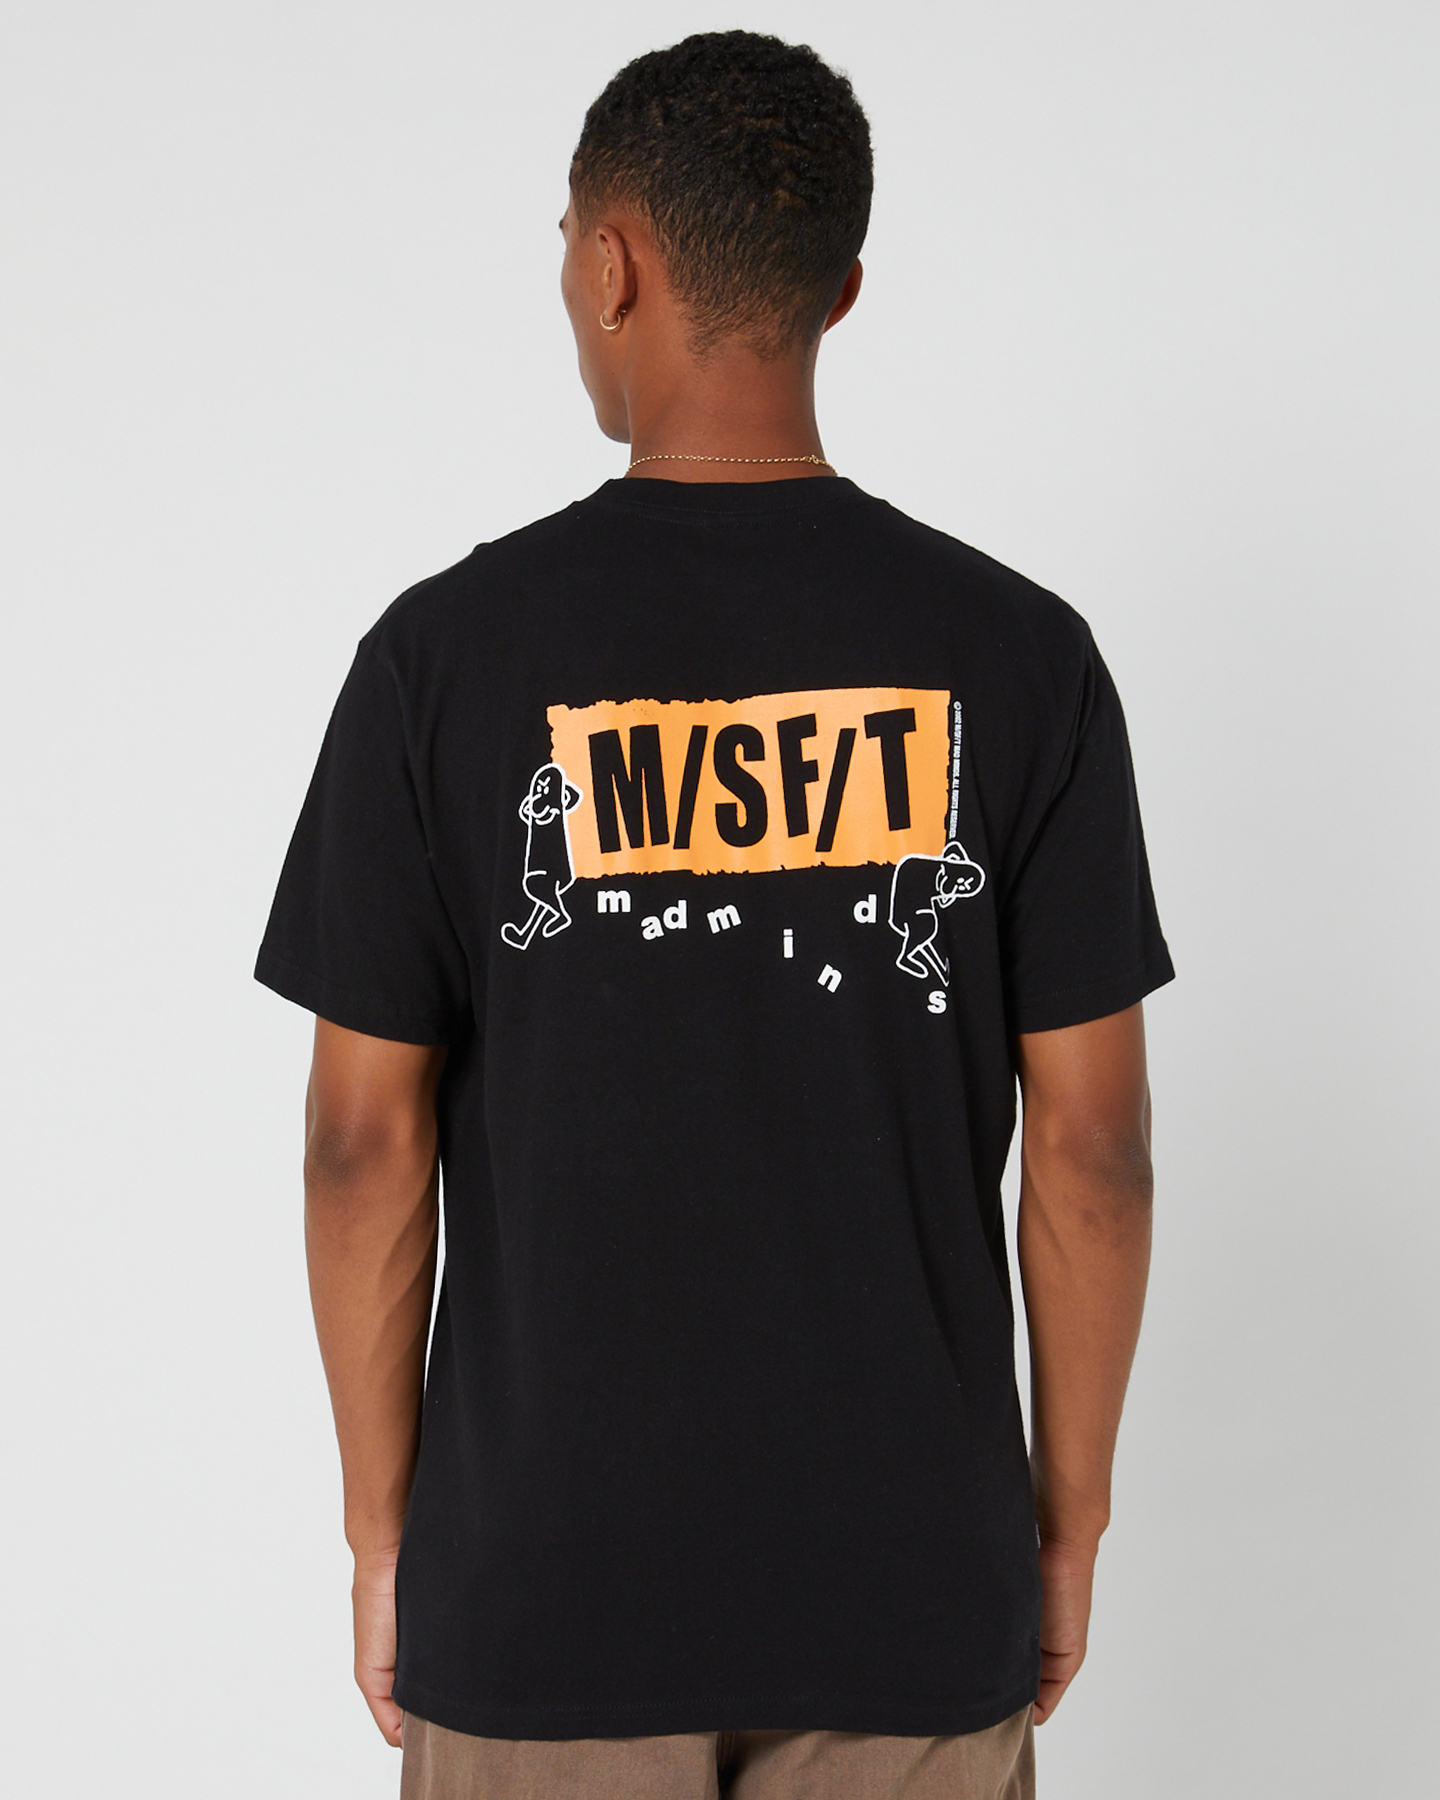 Misfit Life Is Sheep 50/50 Reg Ss Tee - Pitch Black | SurfStitch